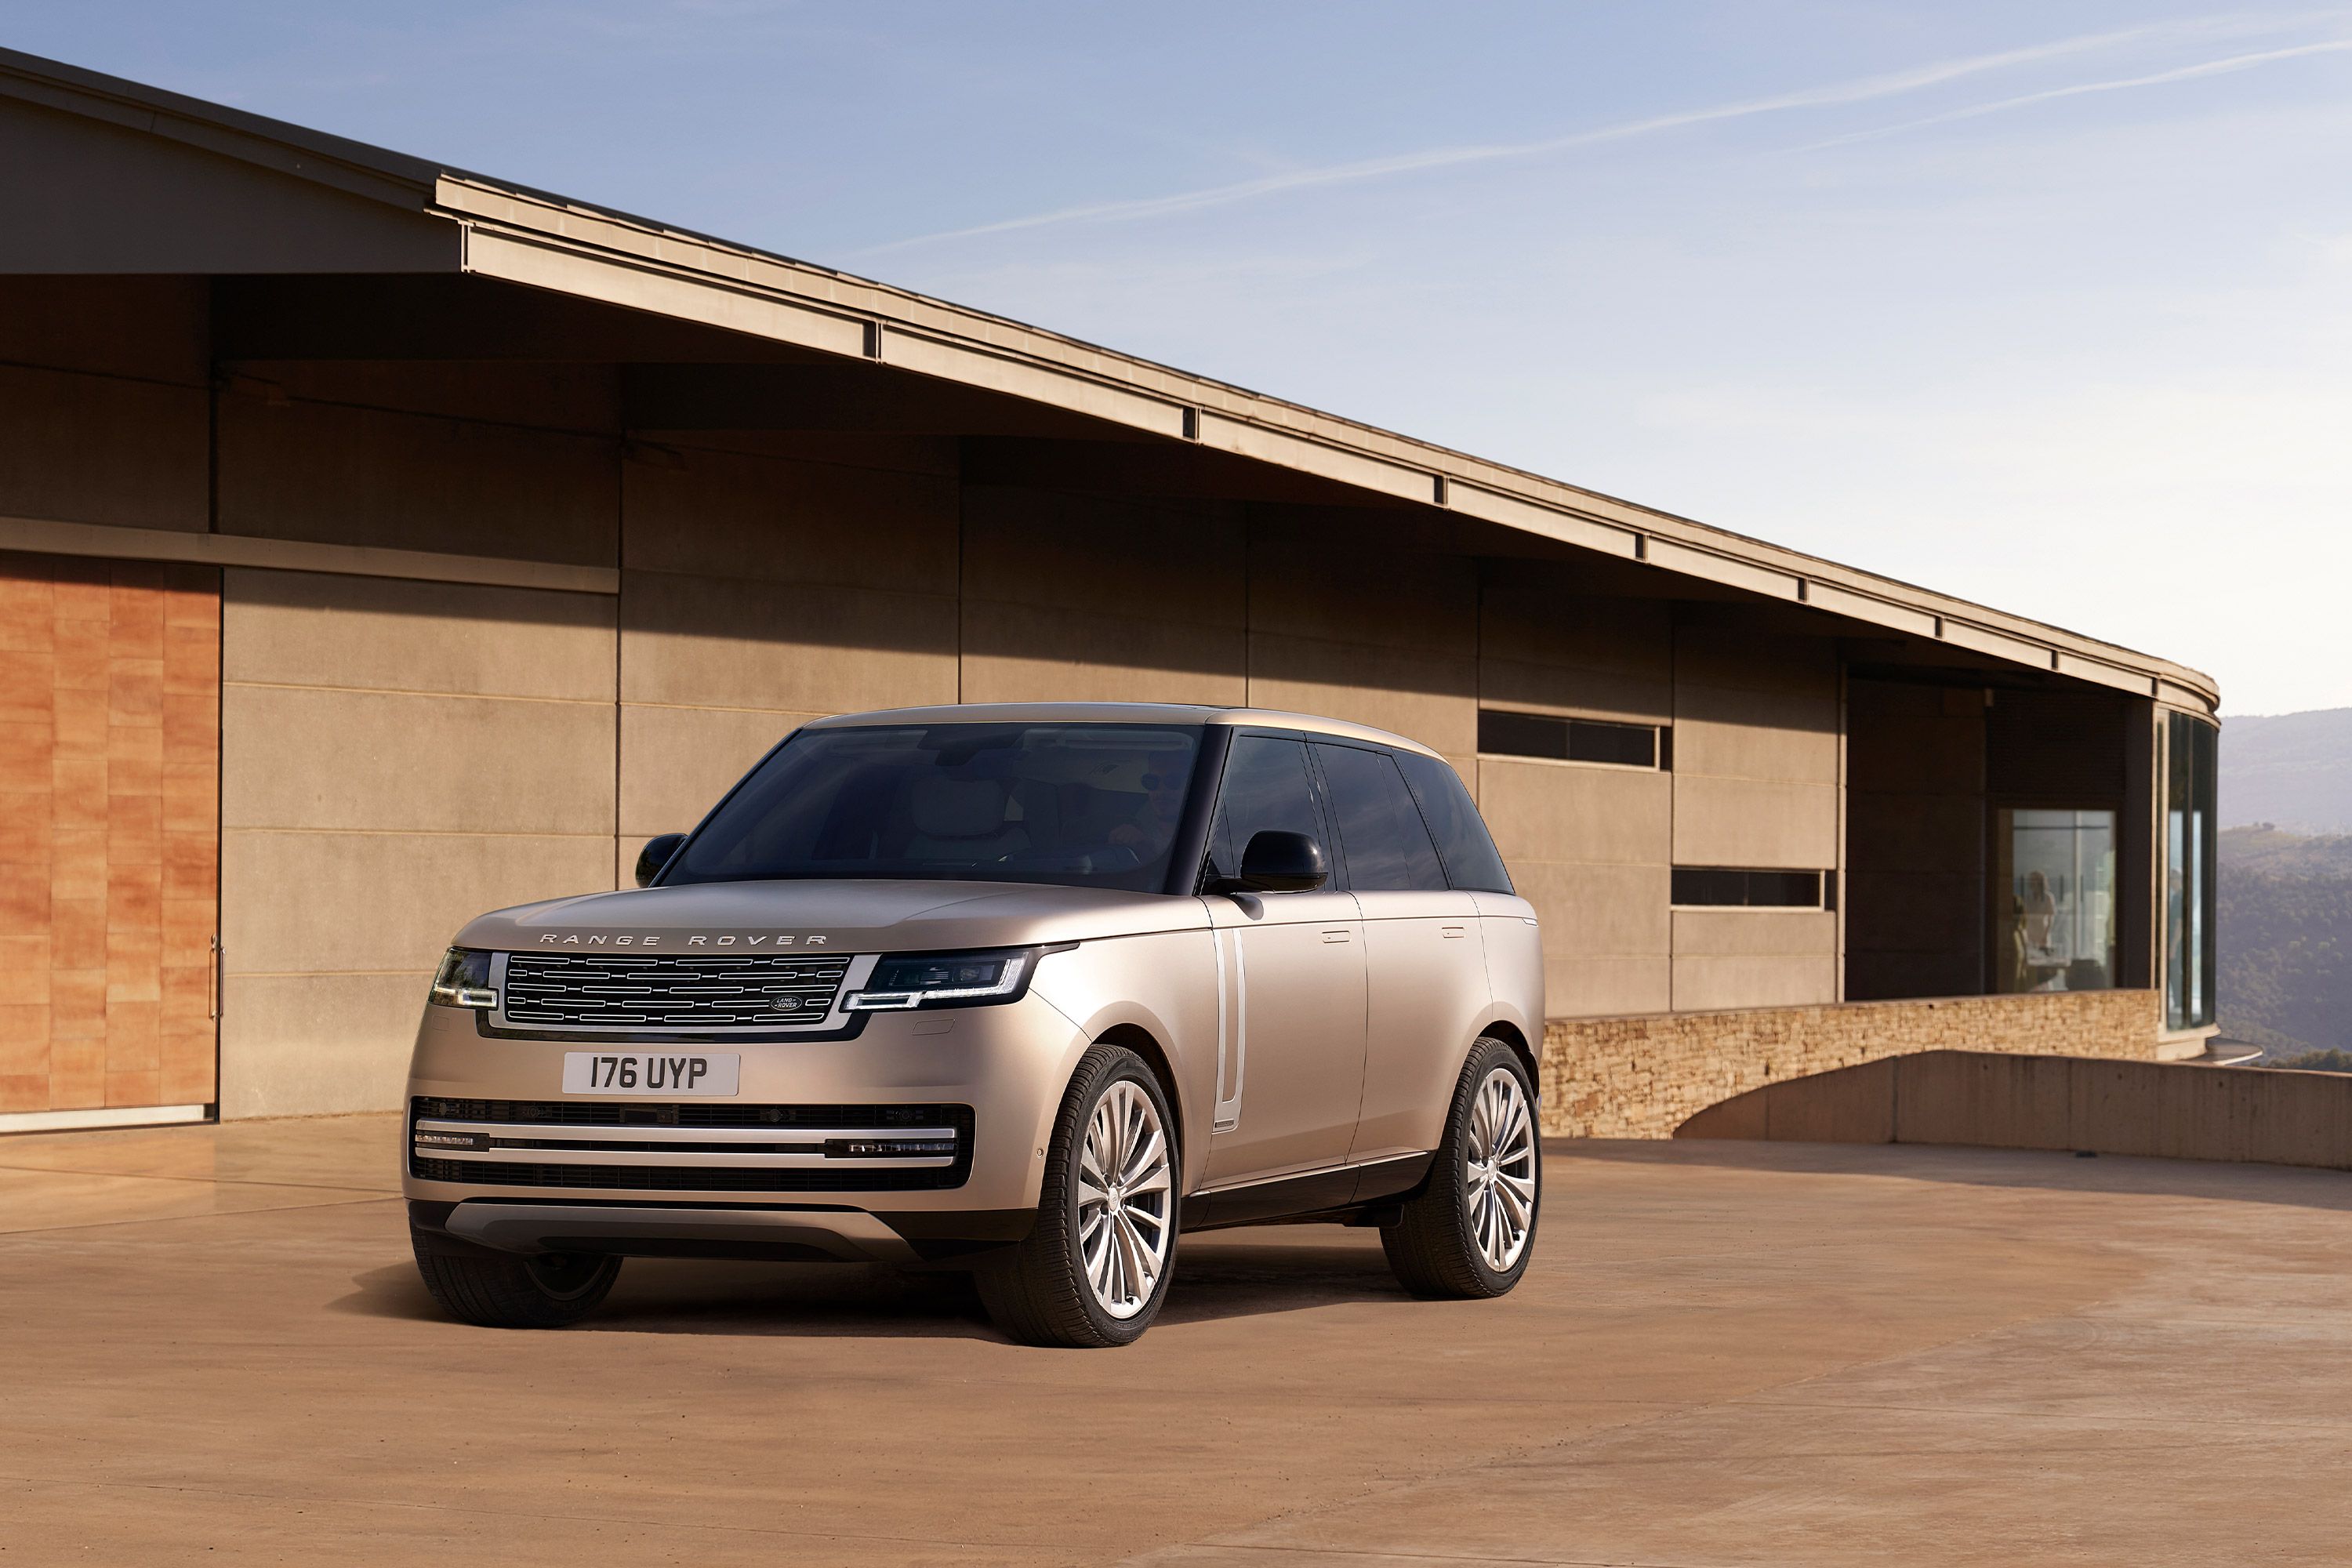 2022 Land Rover Range Rover Continues the Brand's Luxury Legacy